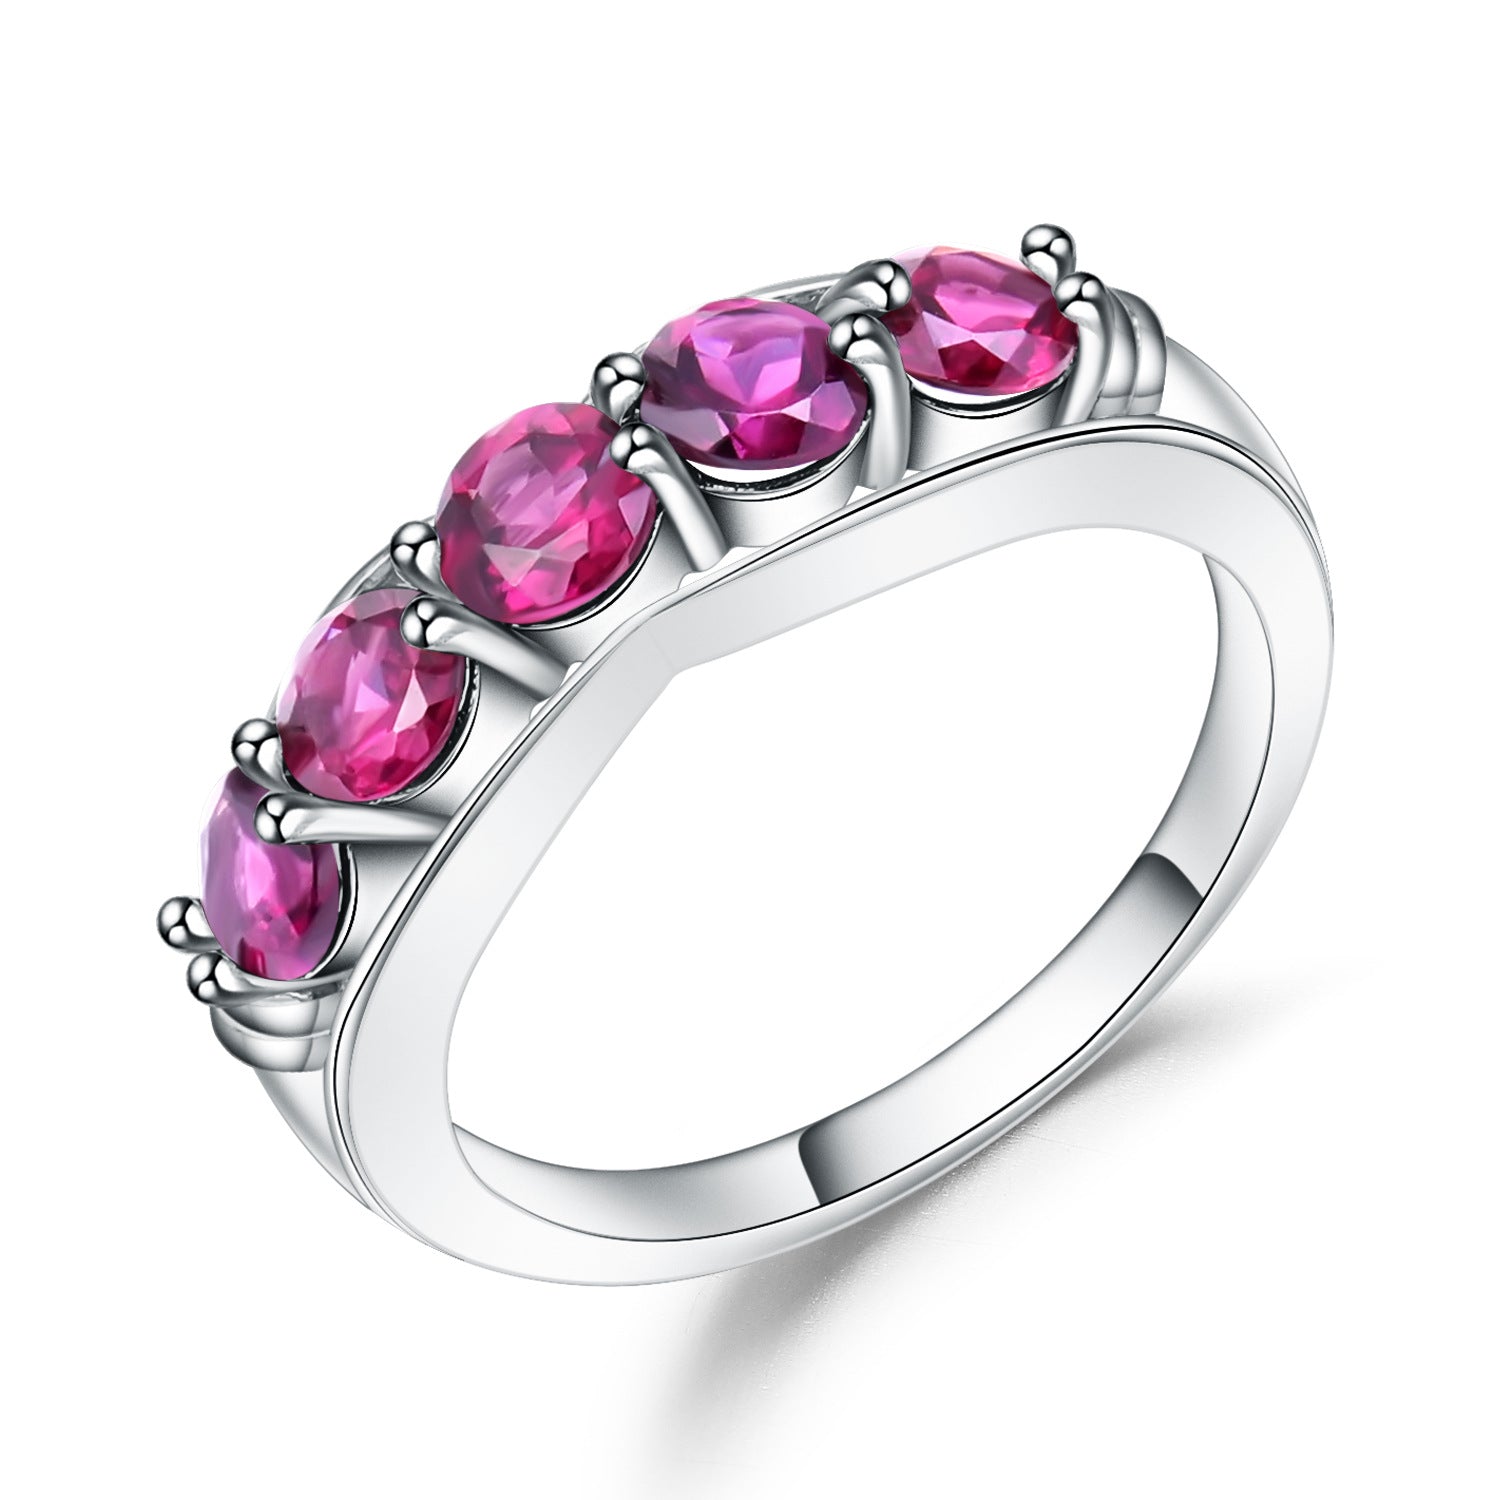 European Small and Simple Fashion Retro Rose Pomegranate S925 Silver Ring for Women